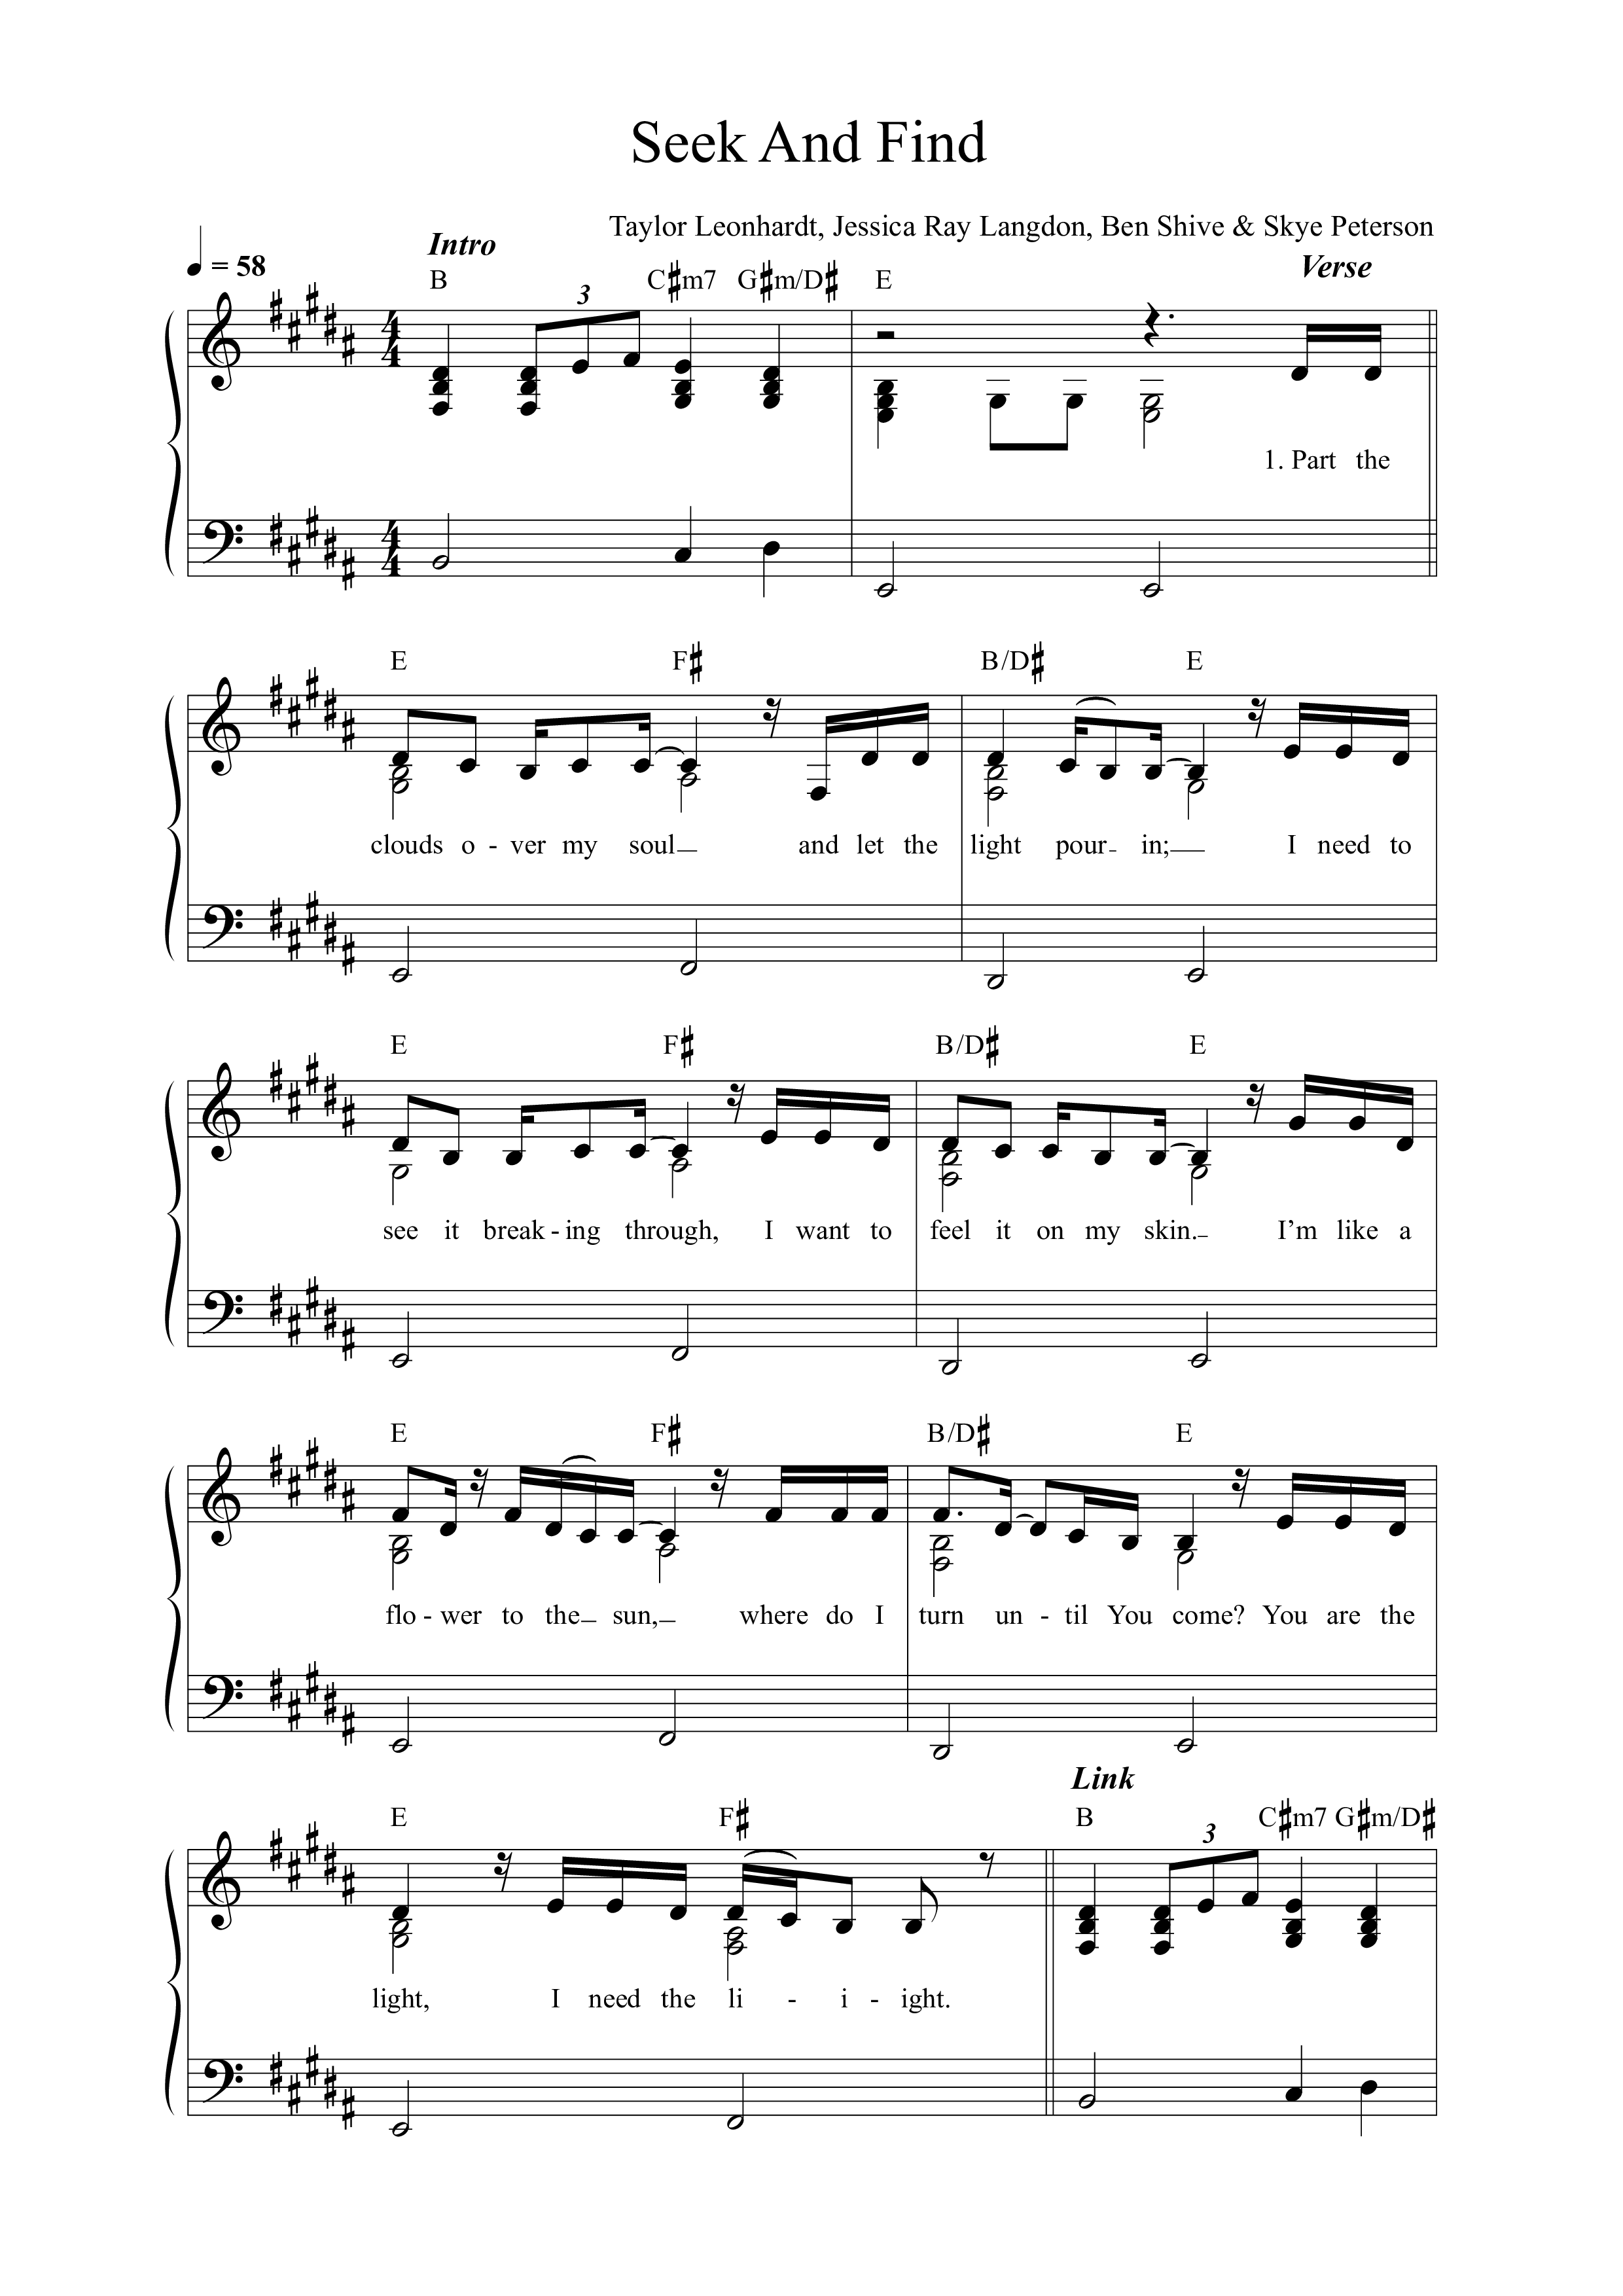 Seek And Find Lead Sheet Melody (Mission House)